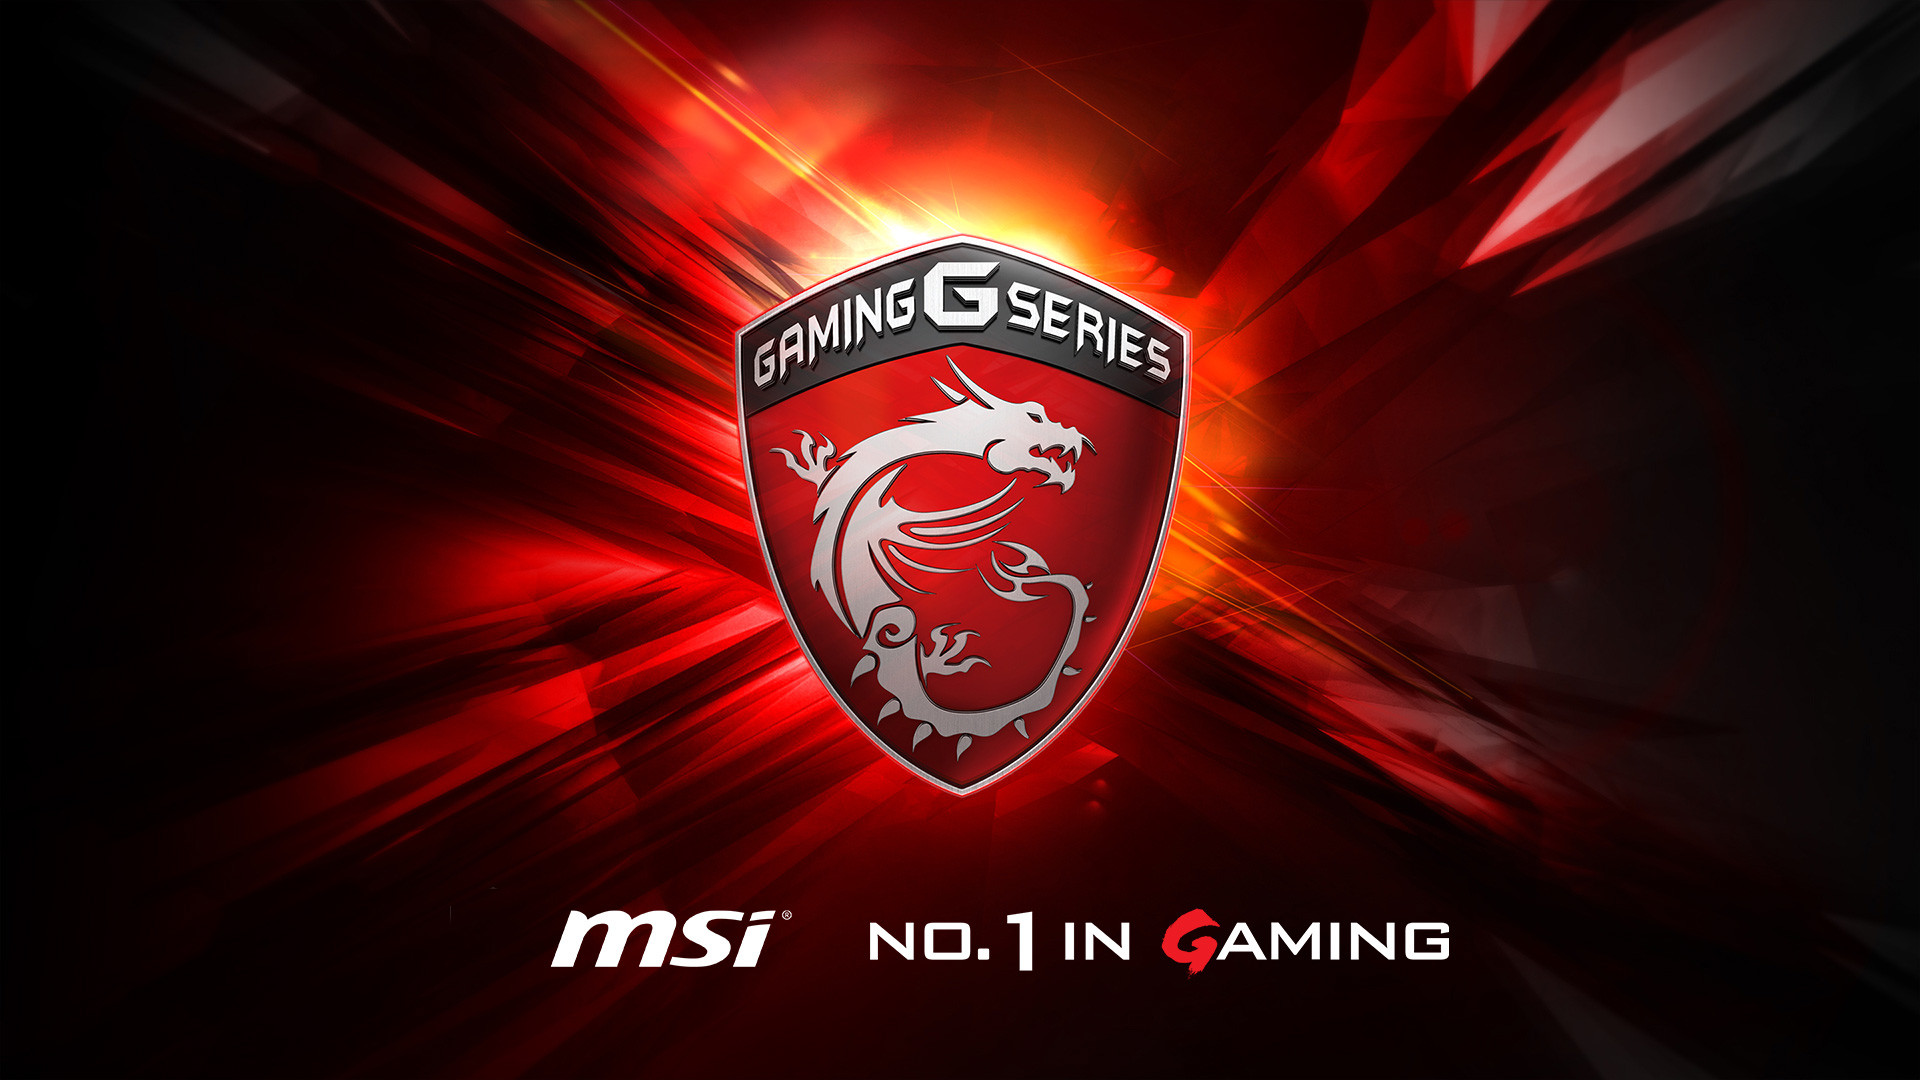 MSI Global – The best gaming gear maker in the world